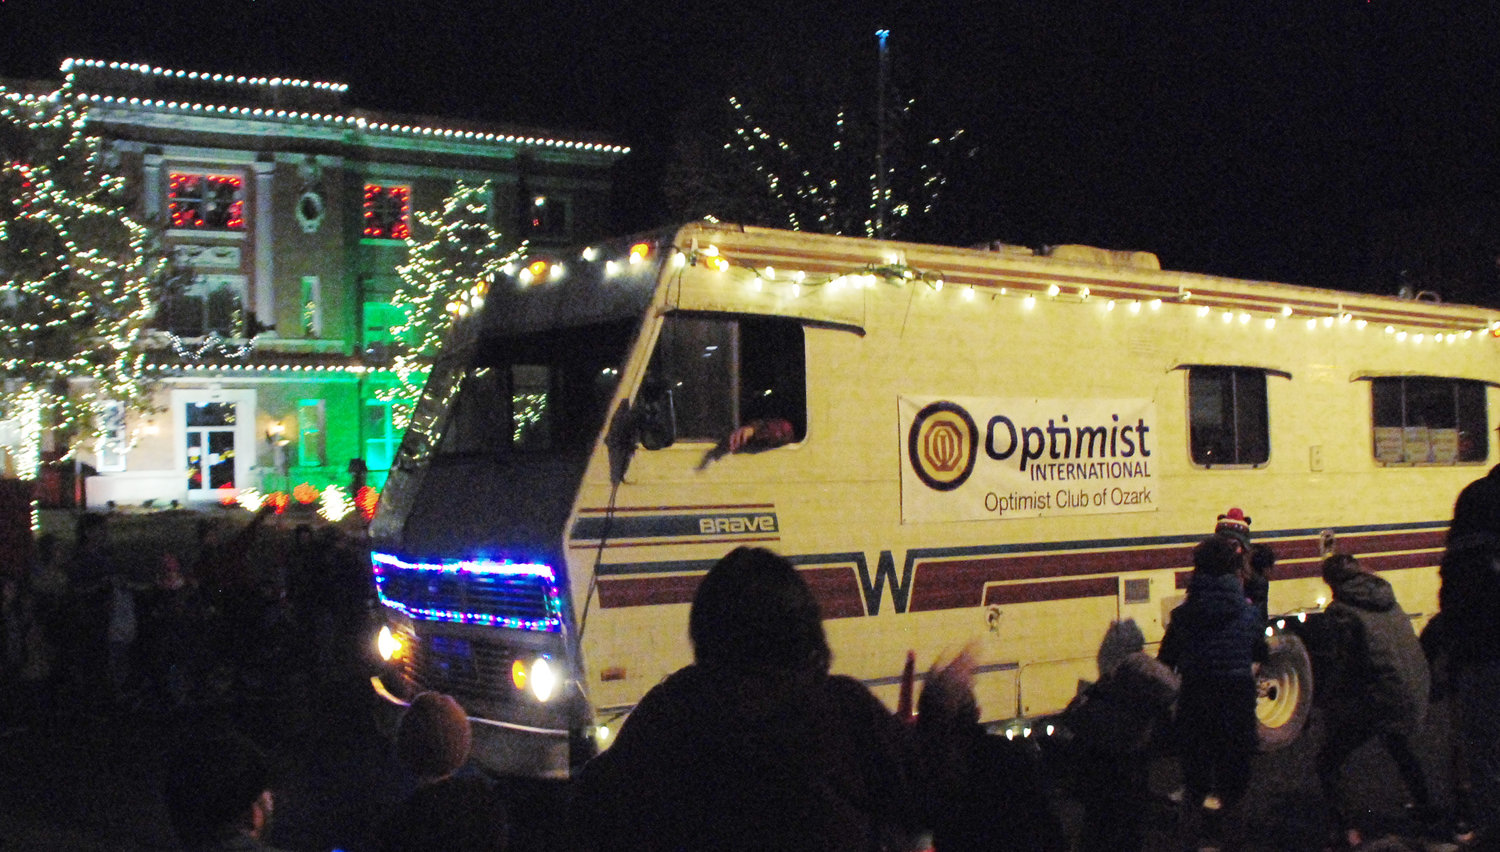 COUSIN EDDIE drives down North Second Avenue in Ozark in an authentic Winnebago recreational vehicle, representing the Optimist Club of Ozark.